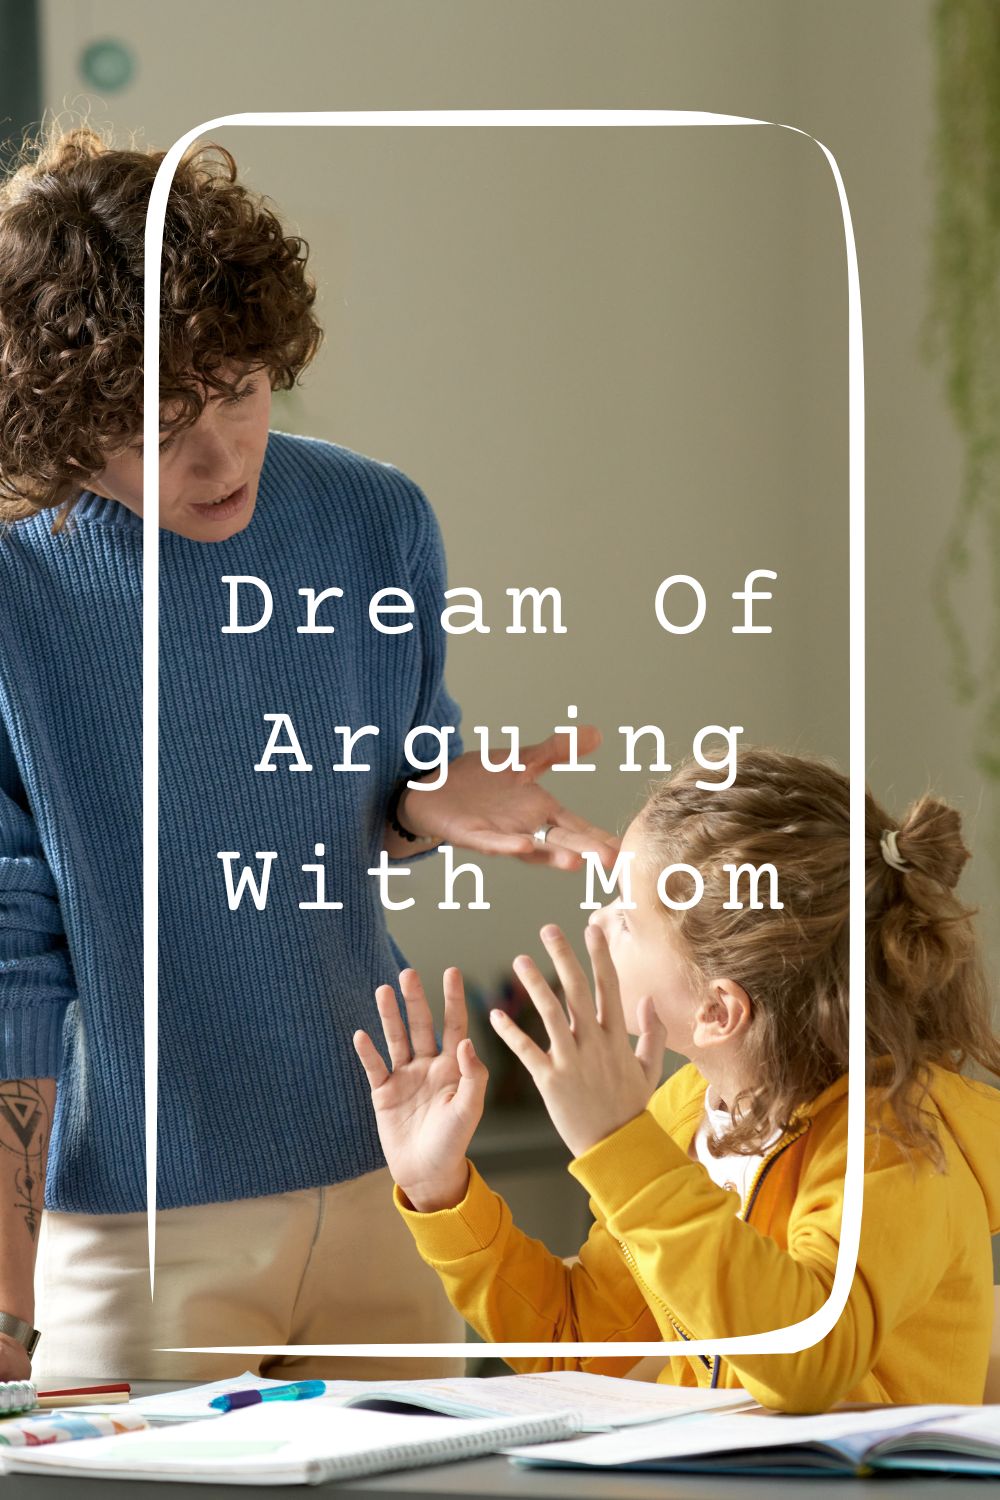 Dream Of Arguing With Mom Meanings 1